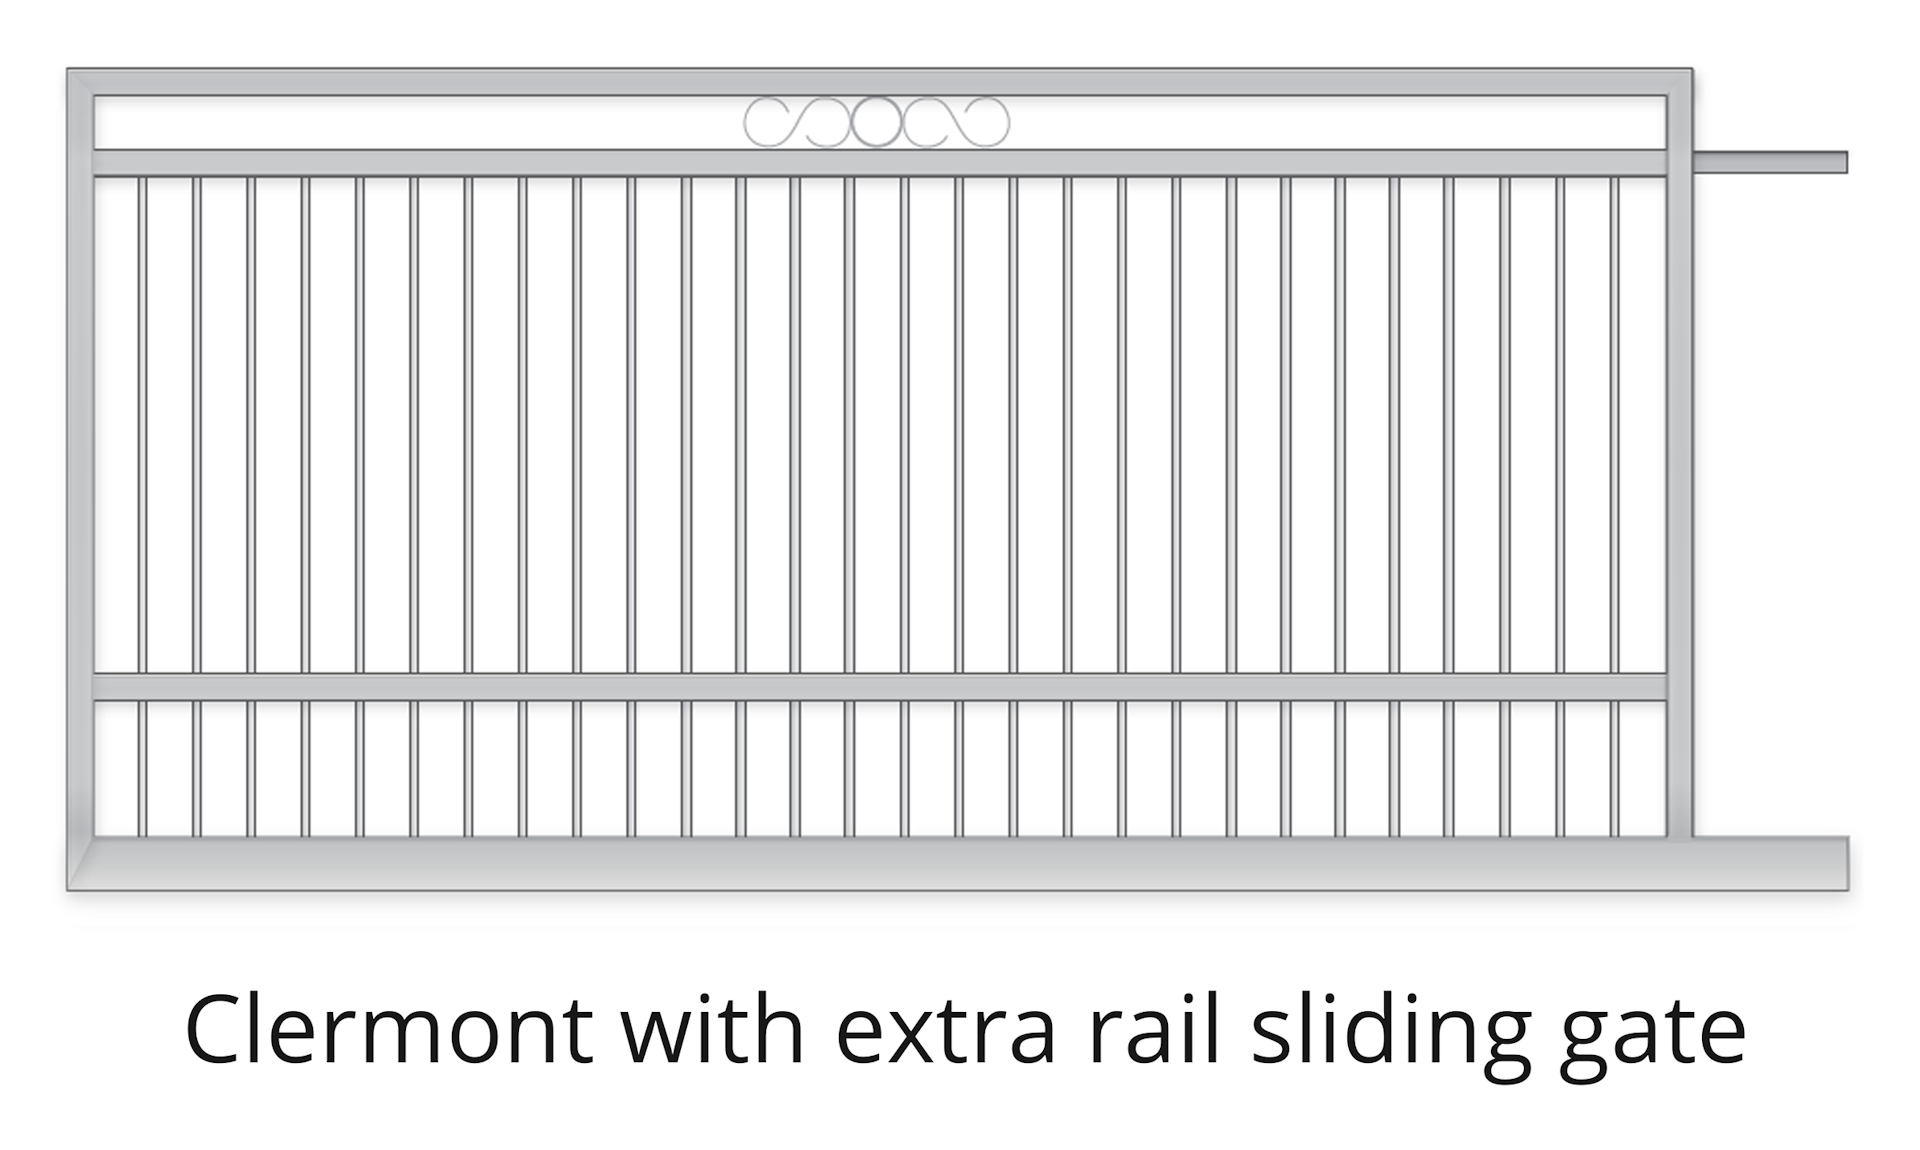 Clermont with extra rail sliding gate